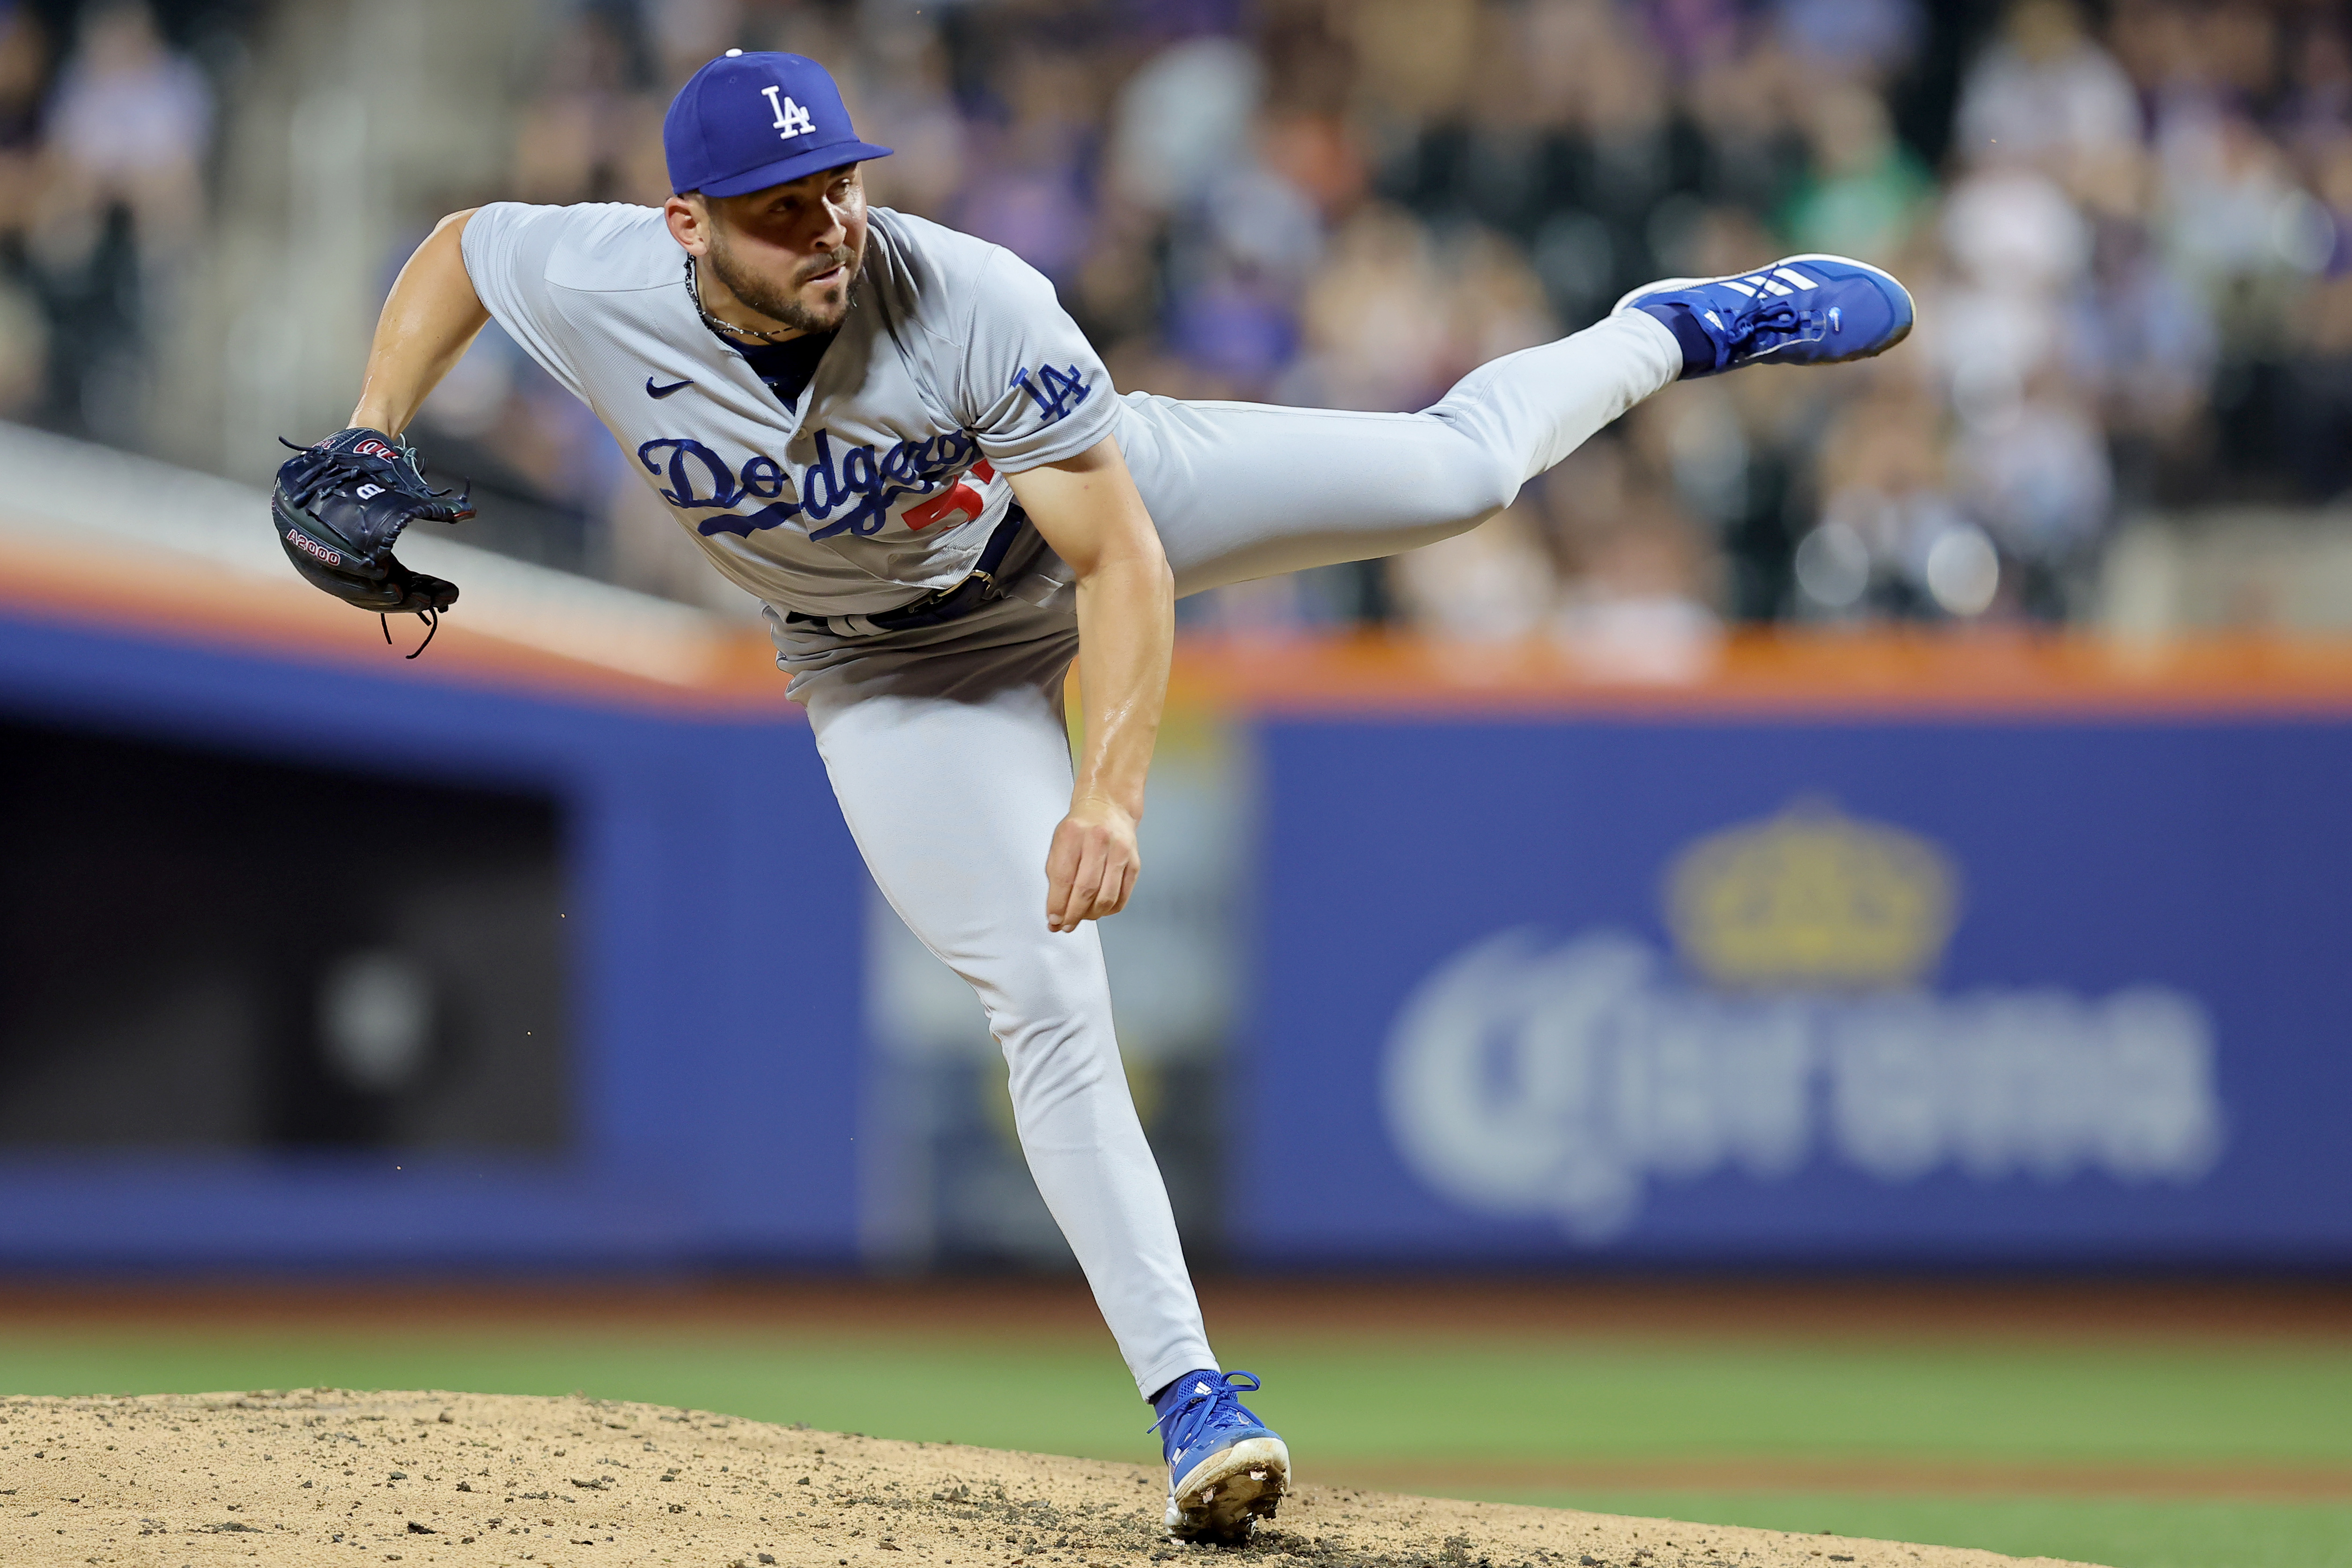 Dodgers extend win streak to 6 by beating Mets